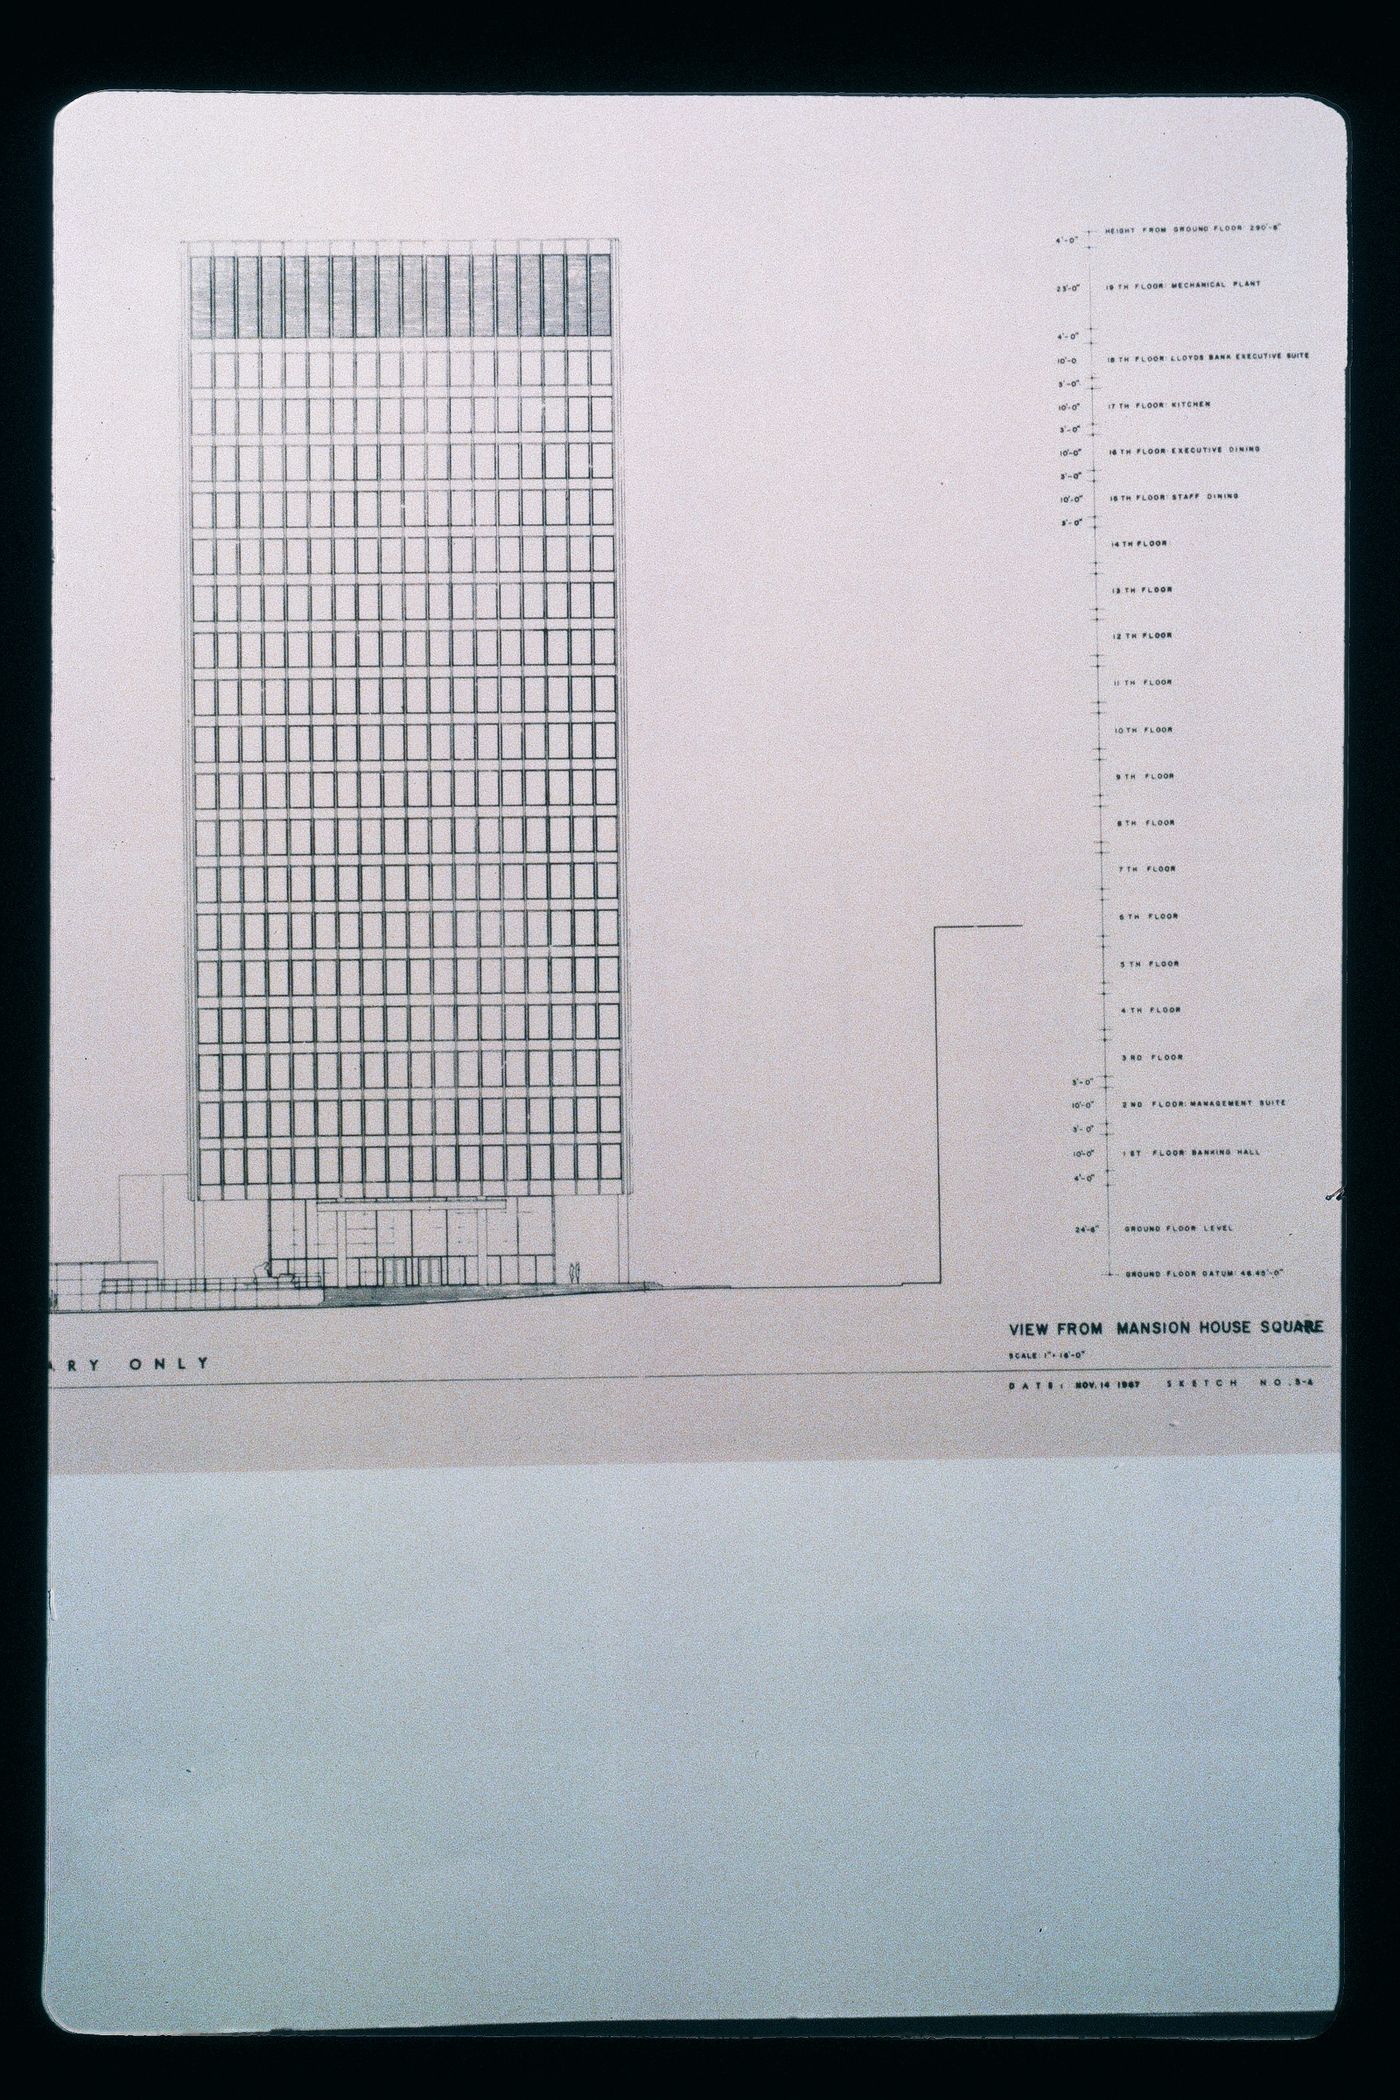 Slide of a drawing for Mansion House Square, London, by Mies van der Rohe